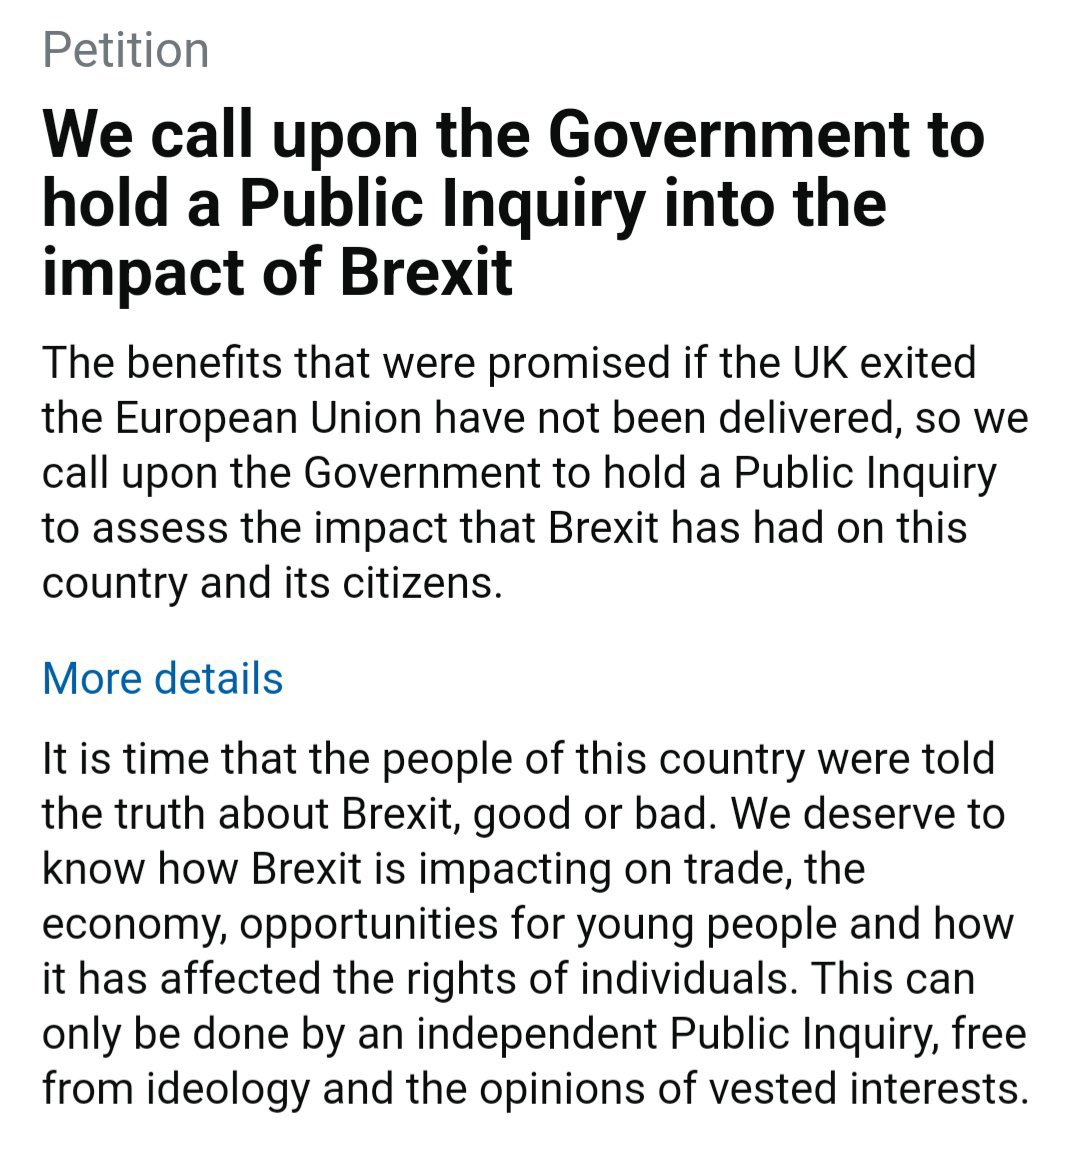 Our petition calling for a Public Inquiry into the impact of Brexit has passed 3,000 names in its first few hours. Let’s get this debated in Parliament. Please sign and share widely. petition.parliament.uk/petitions/6282…